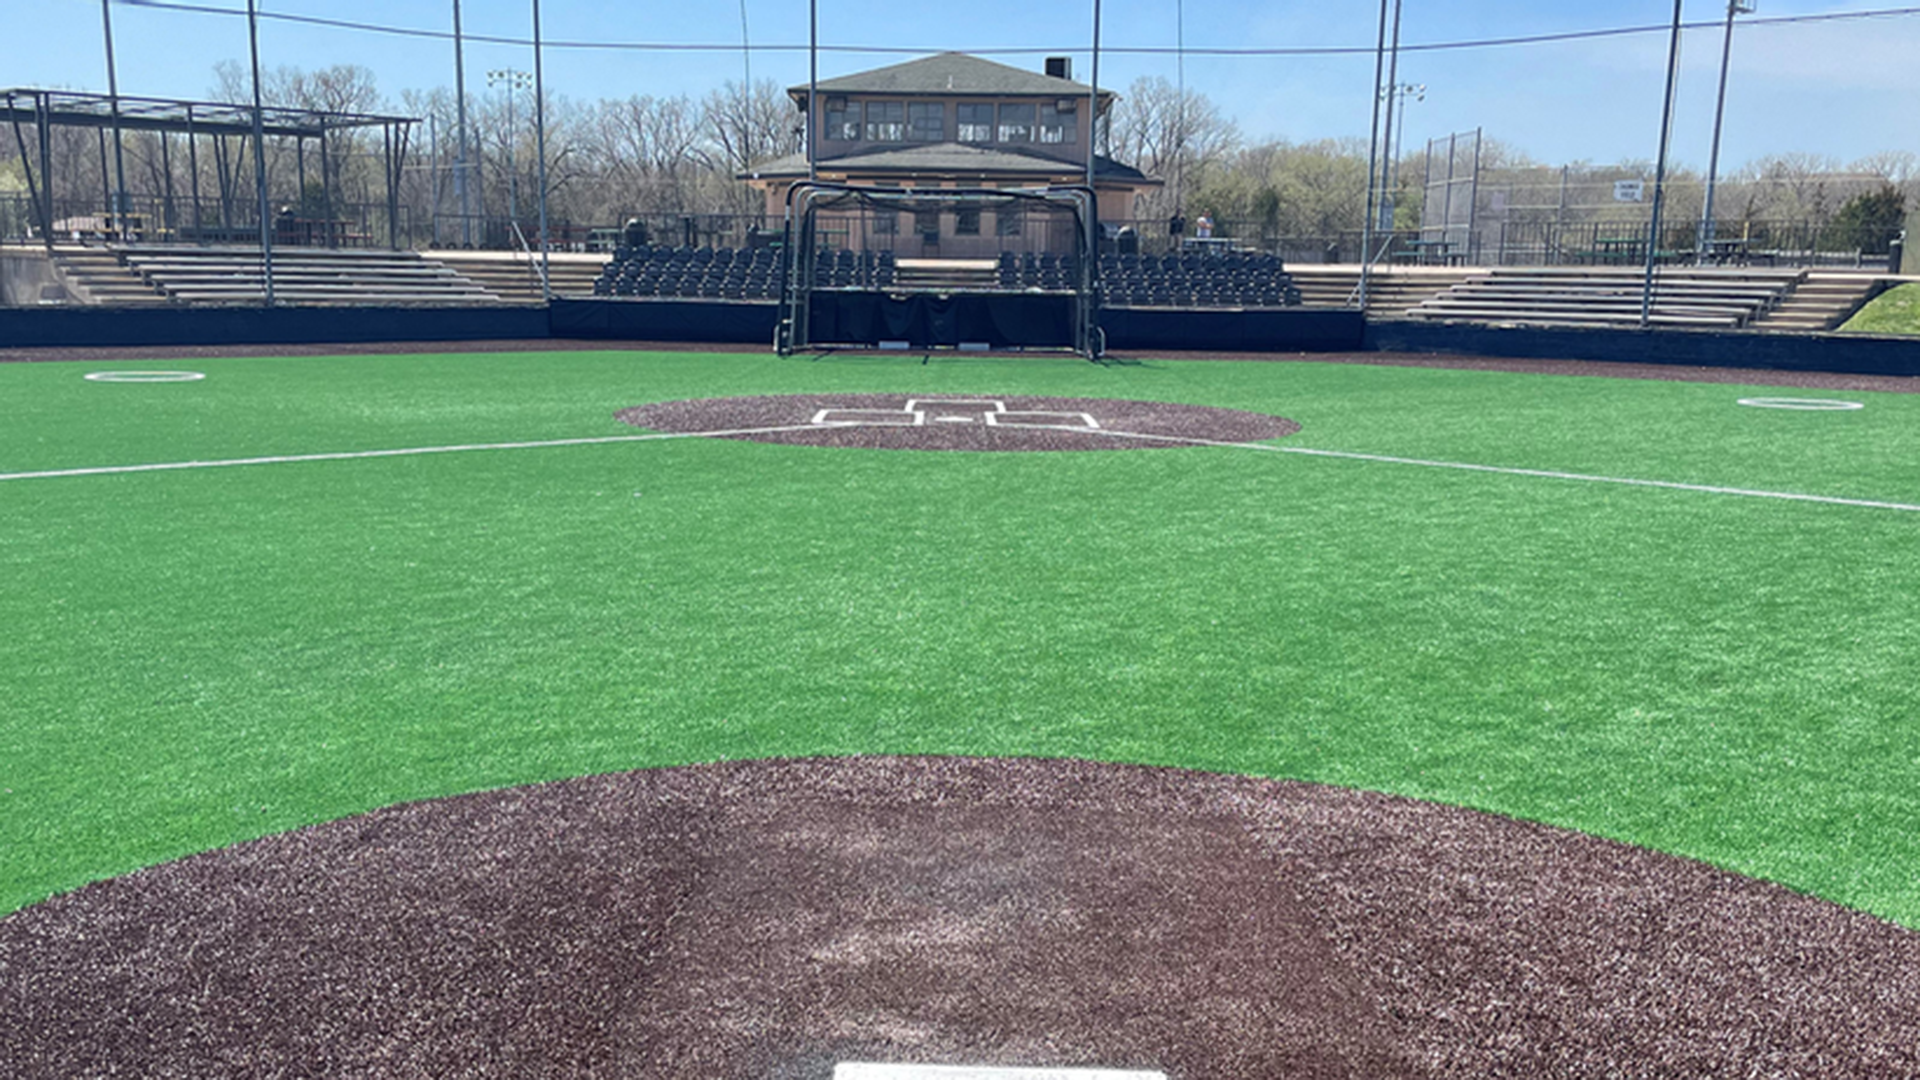 The baseball field at Emporia State University in Emporia, Kans. The university's baseball program has a decades-long tie to Tucson. Its 1978 NAIA championship team featured six Tucsonans.